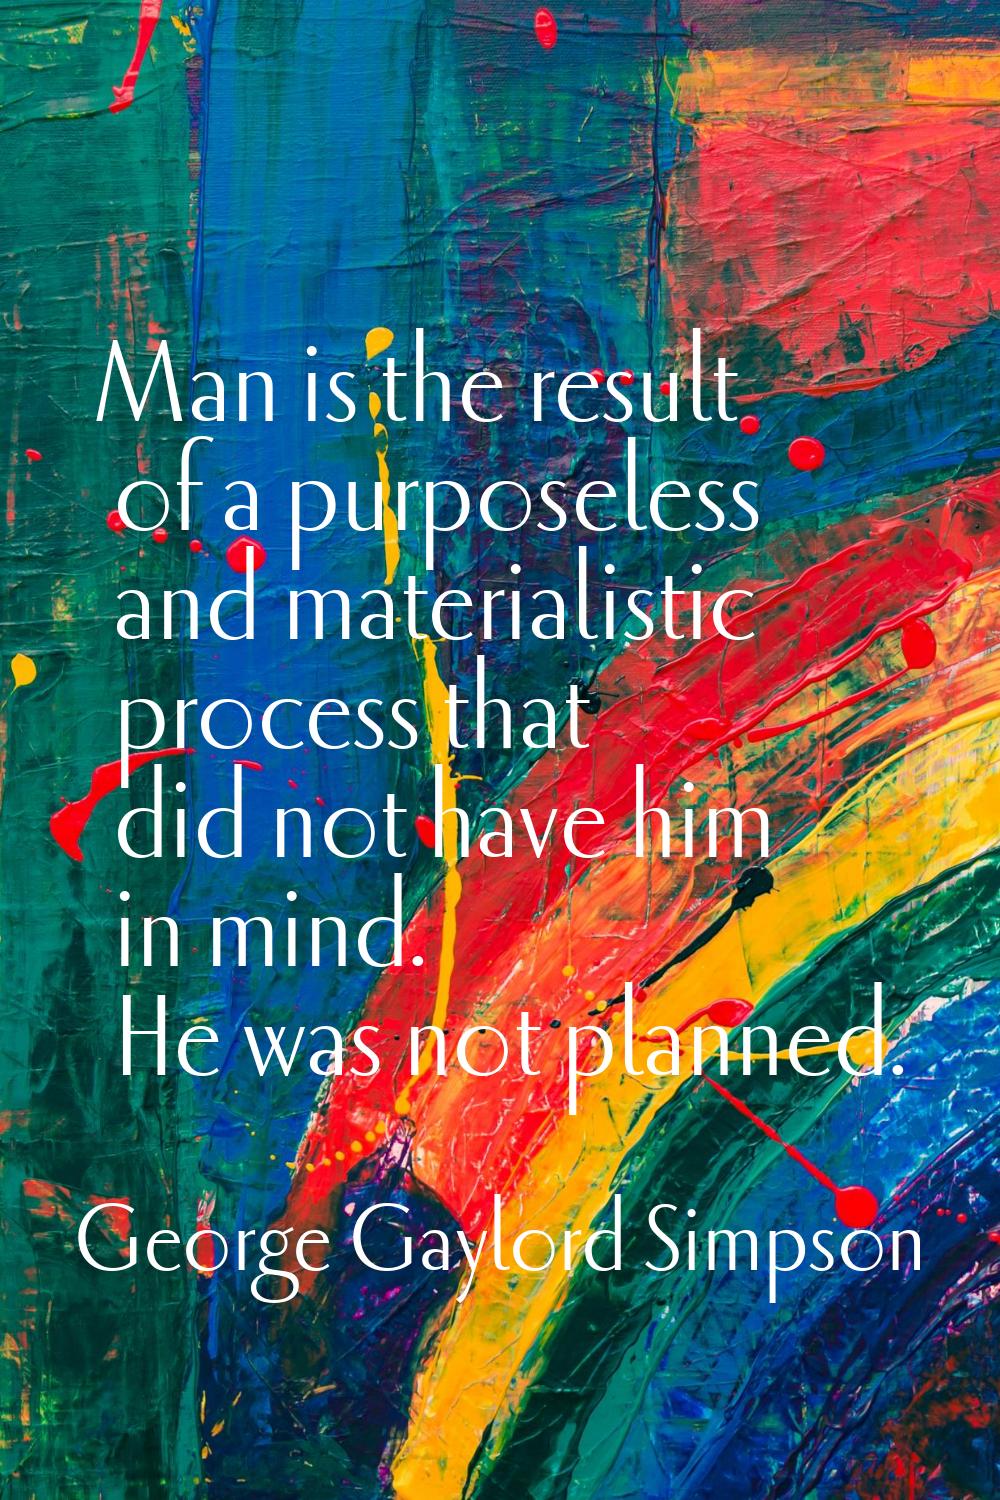 Man is the result of a purposeless and materialistic process that did not have him in mind. He was 